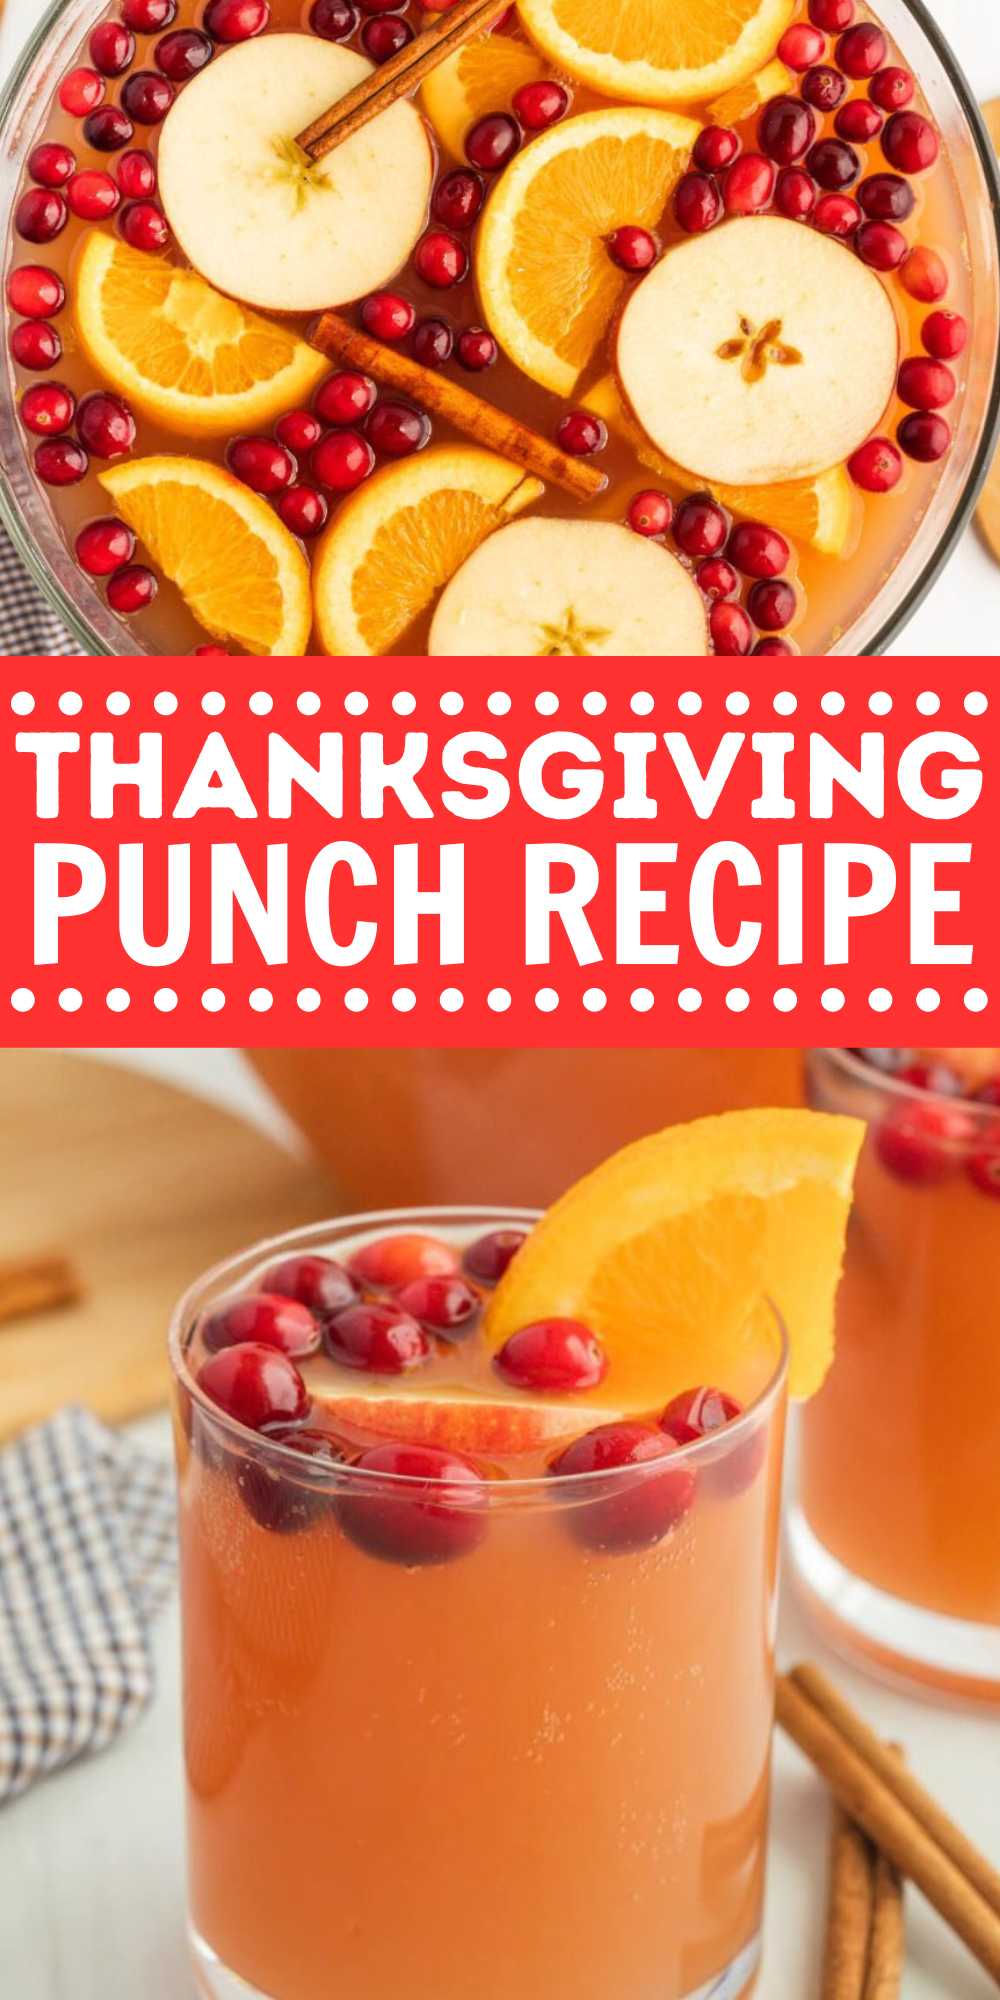 This Thanksgiving Punch is perfect to serve with your Thanksgiving dinner. It is full of fall flavors and is made with simple ingredients. This punch can be made in a variety of ways. Serve this Thanksgiving punch in fun glasses with slices of oranges, fresh cranberries and more. The best fall drink to serve this holiday season. #eatingonadime #thanksgivingpunchrecipe #punch